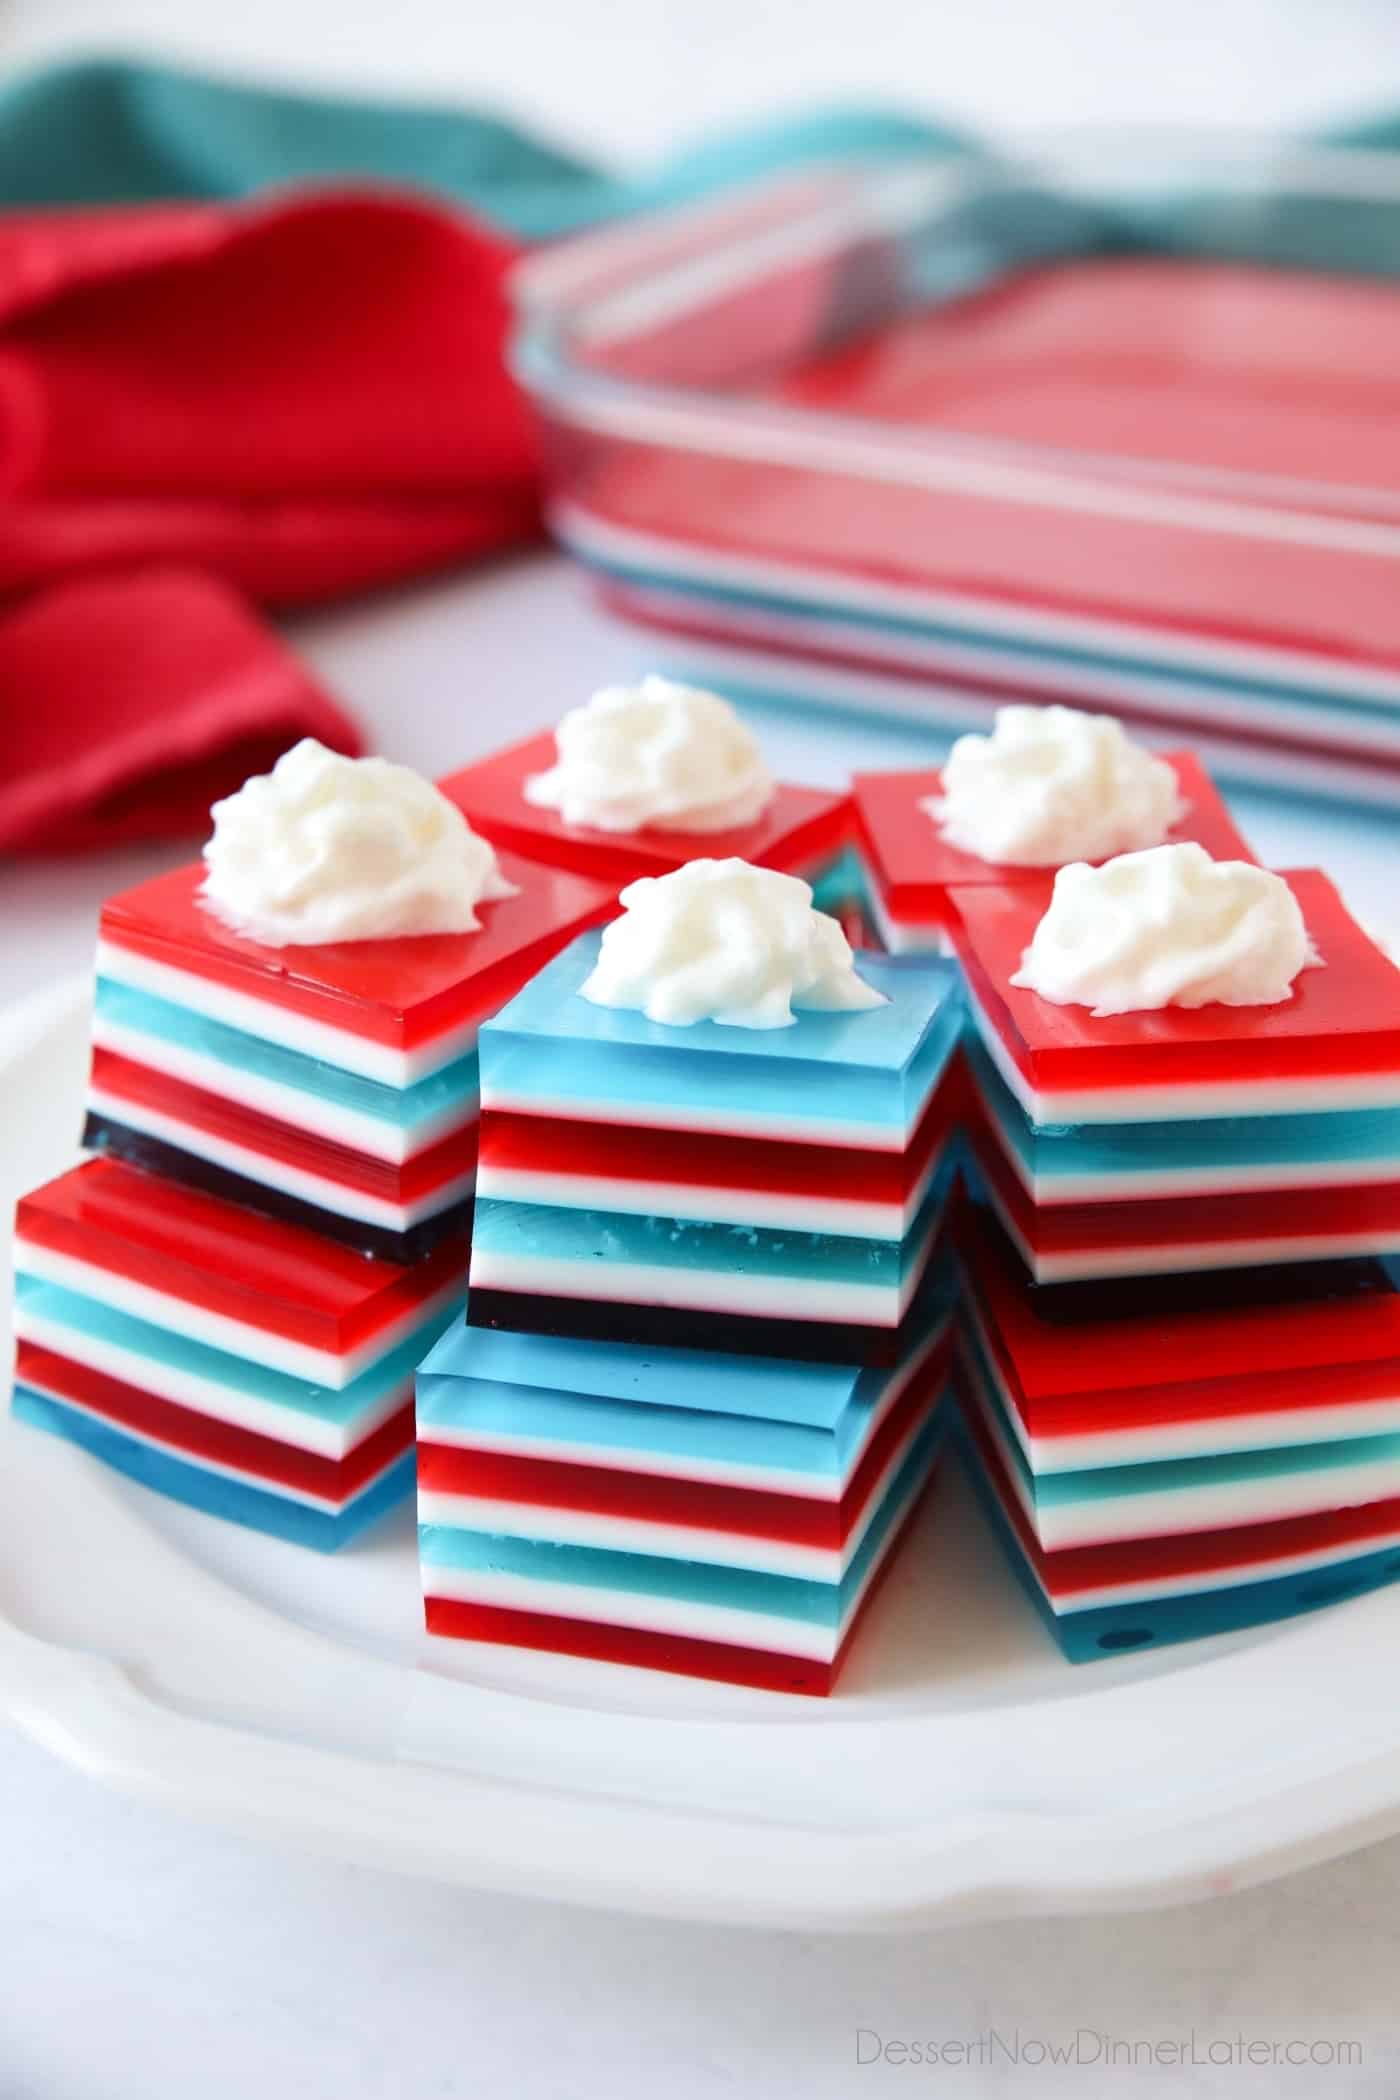 Red White And Blue Jello 4th Of July Dessert Dessert Now Dinner Later